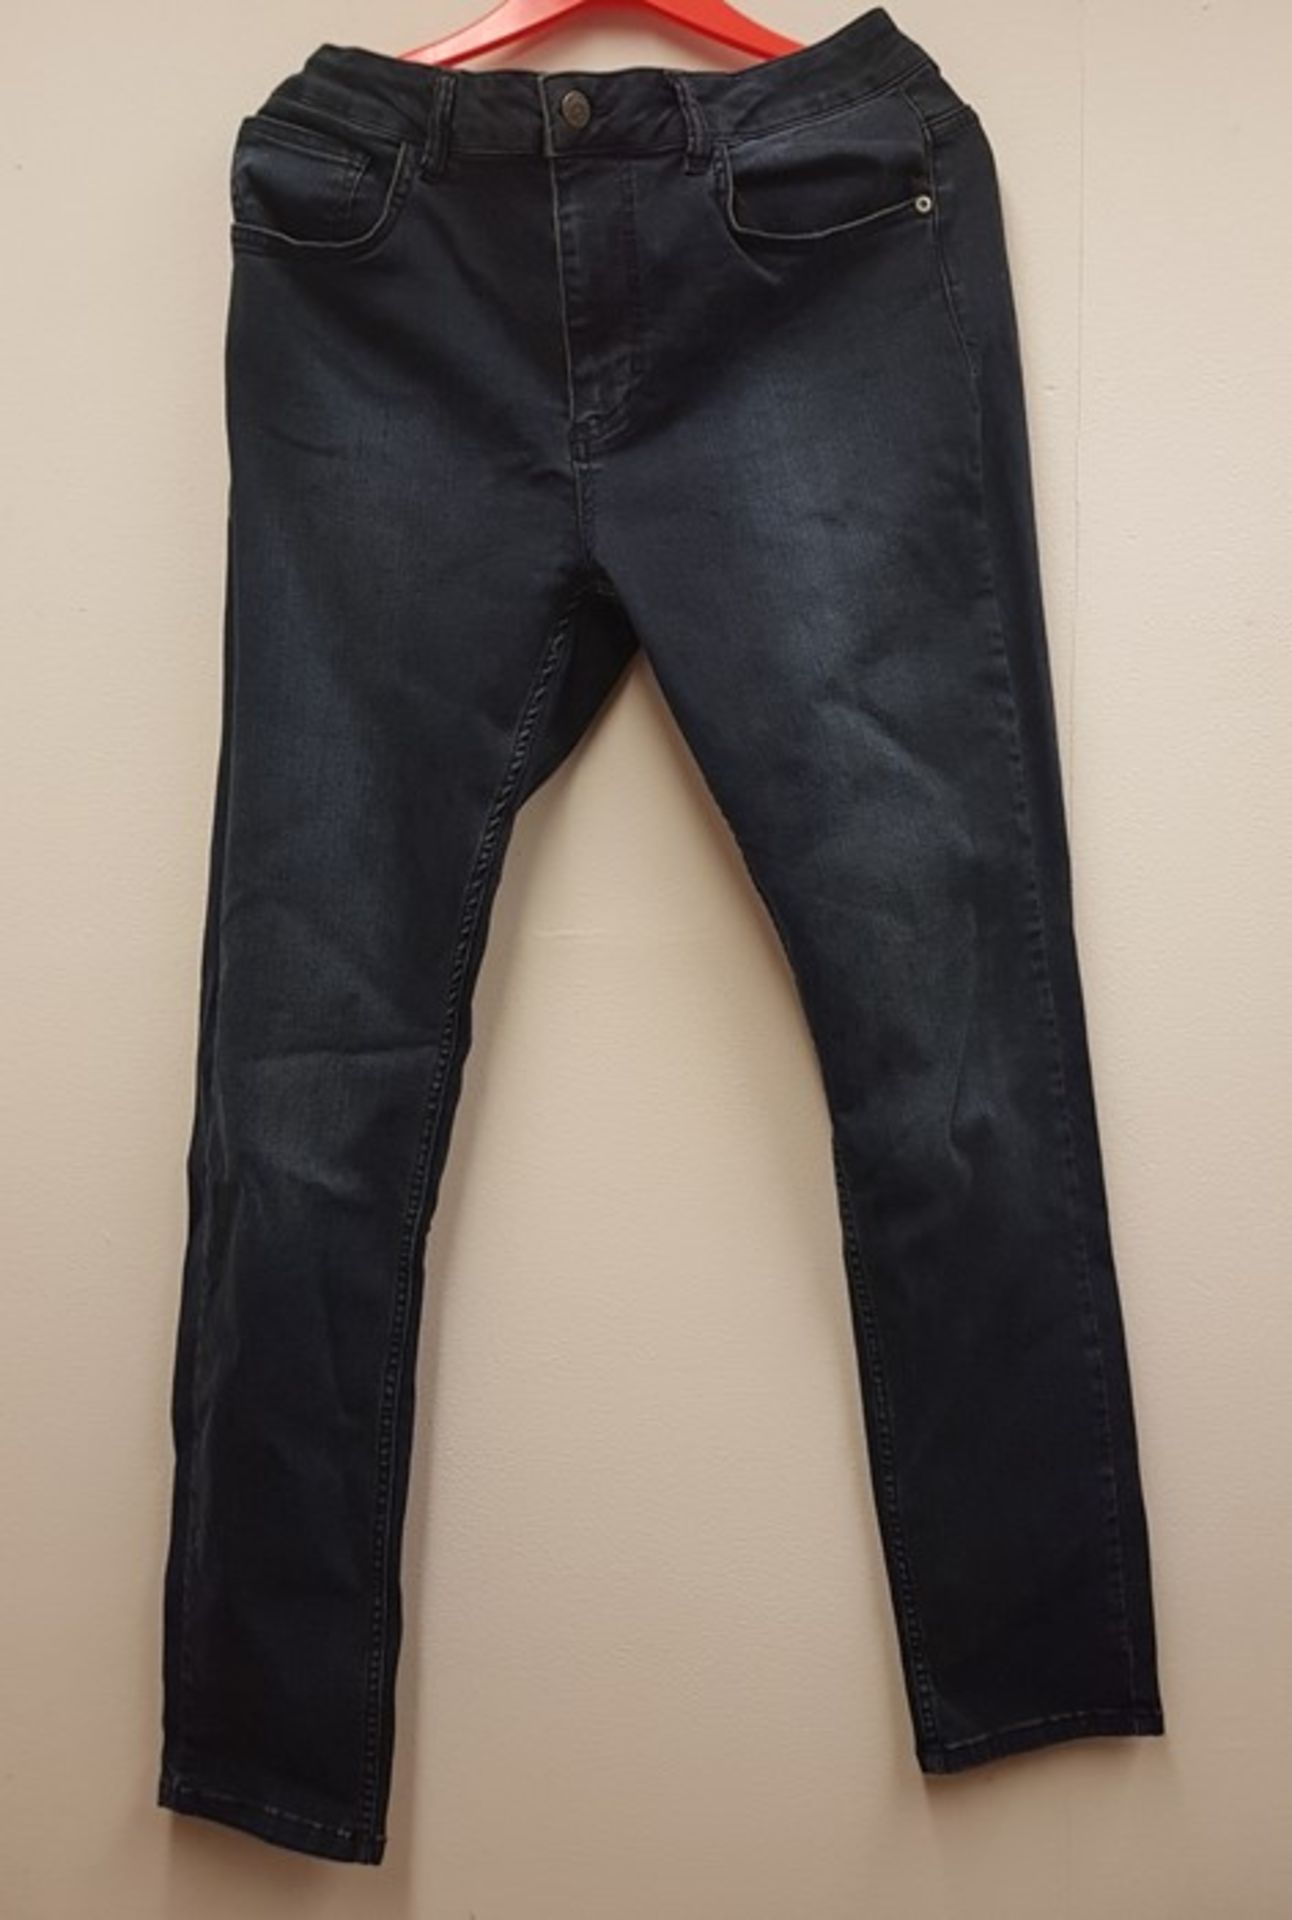 1 AS NEW PAIR OF ESSENTIAL BLUE SKINNY JEANS SIZE